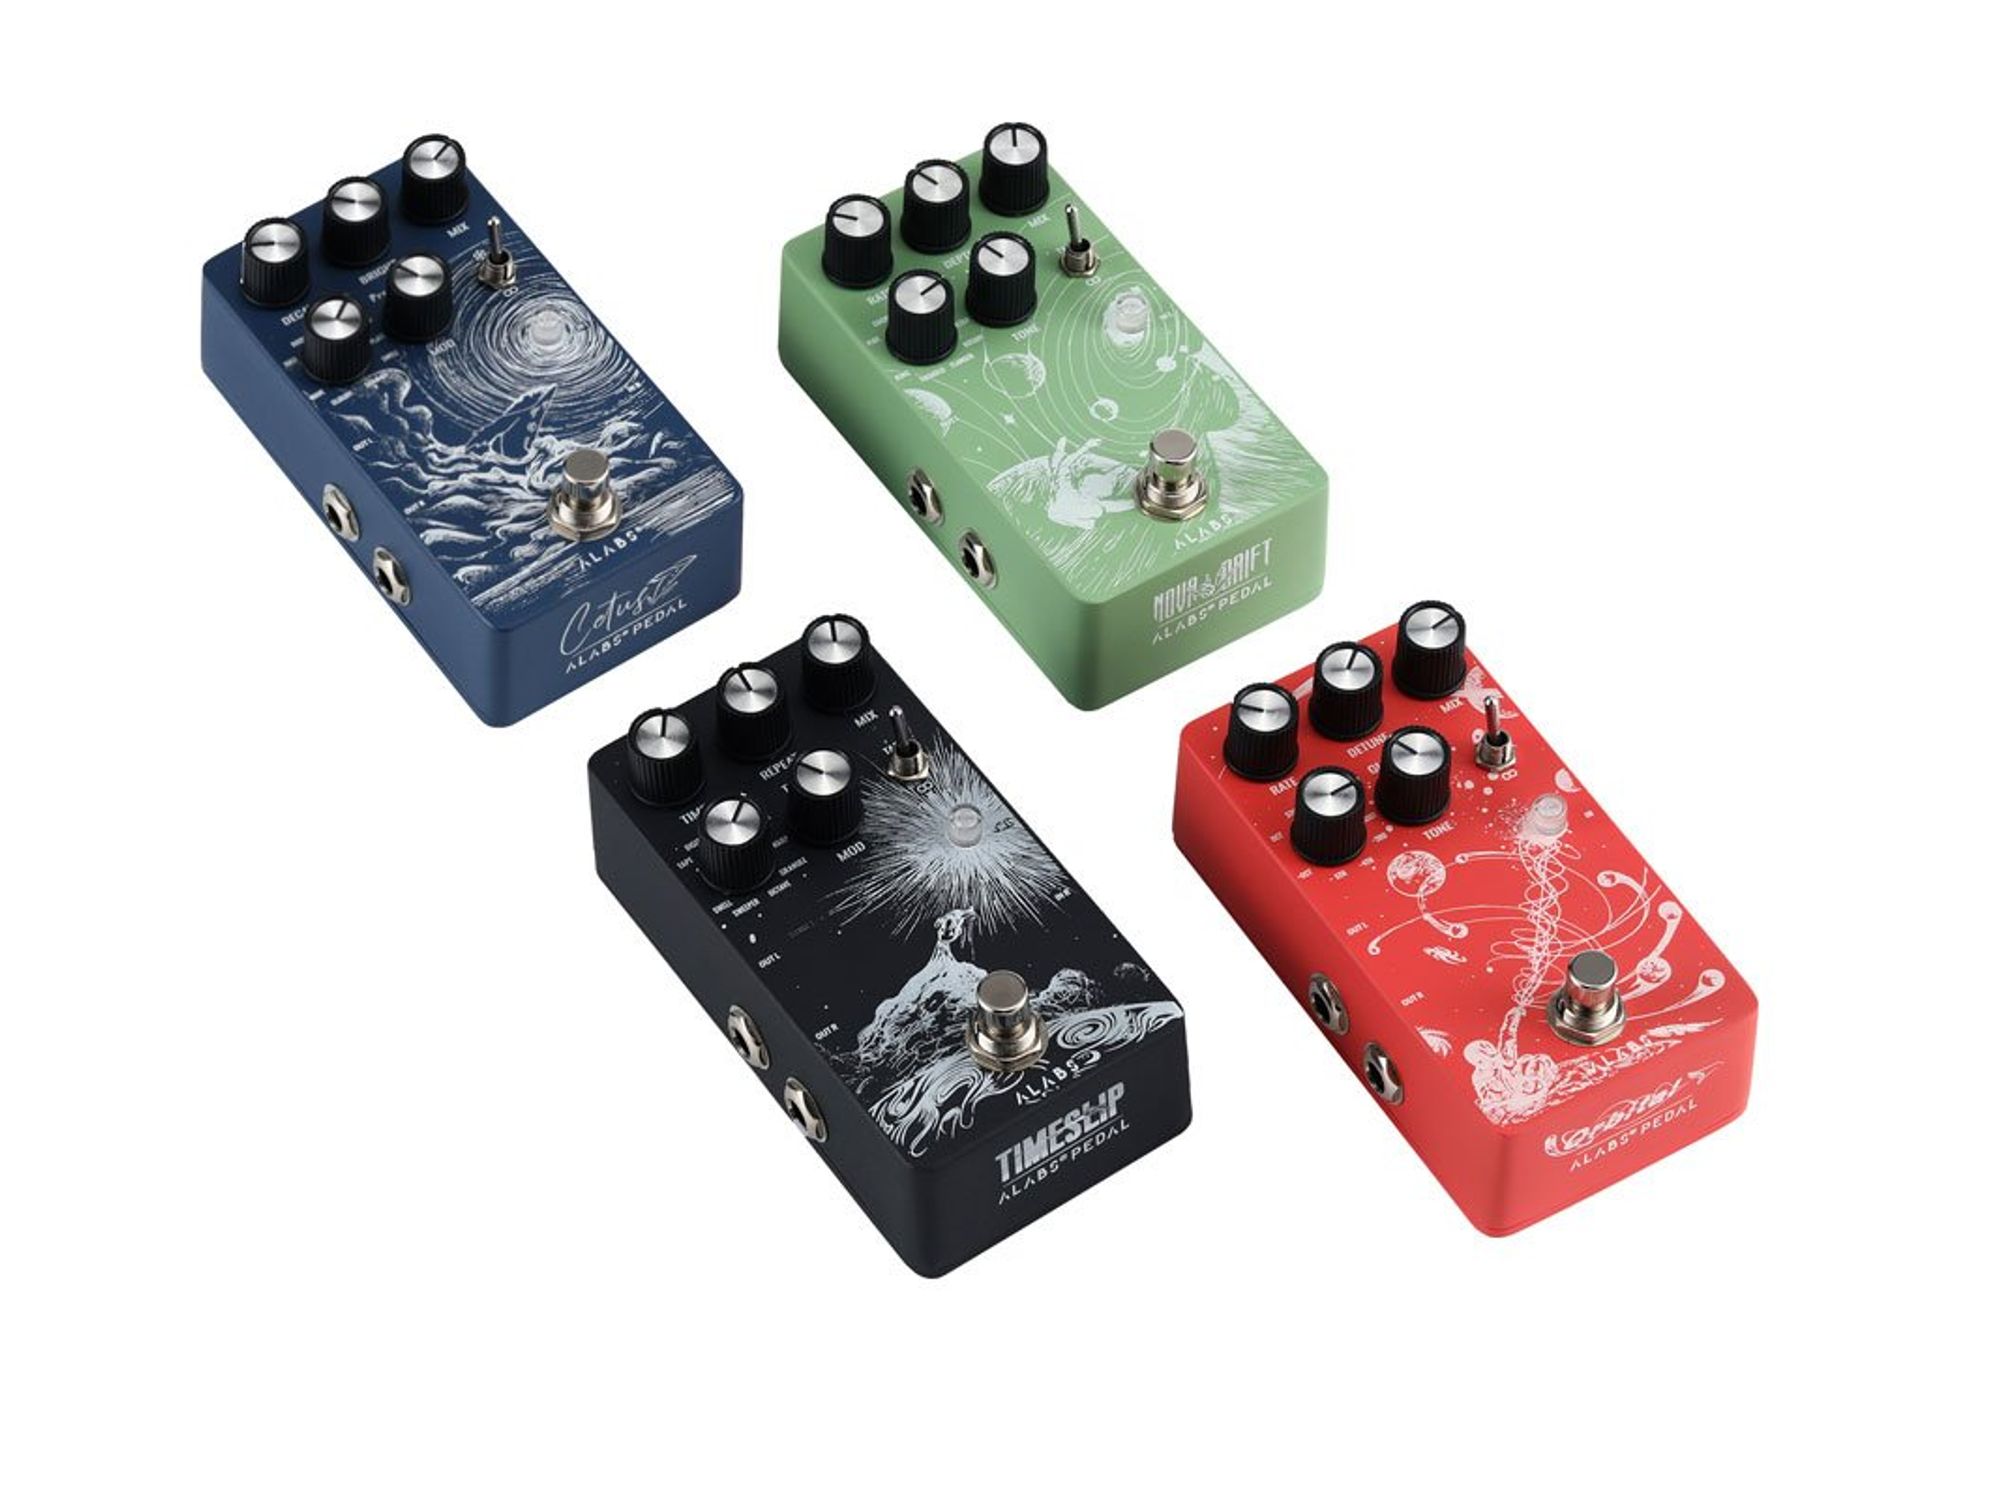 ALABS Audio Unveils New Reverb, Delay, Modulation & Pitch Pedals